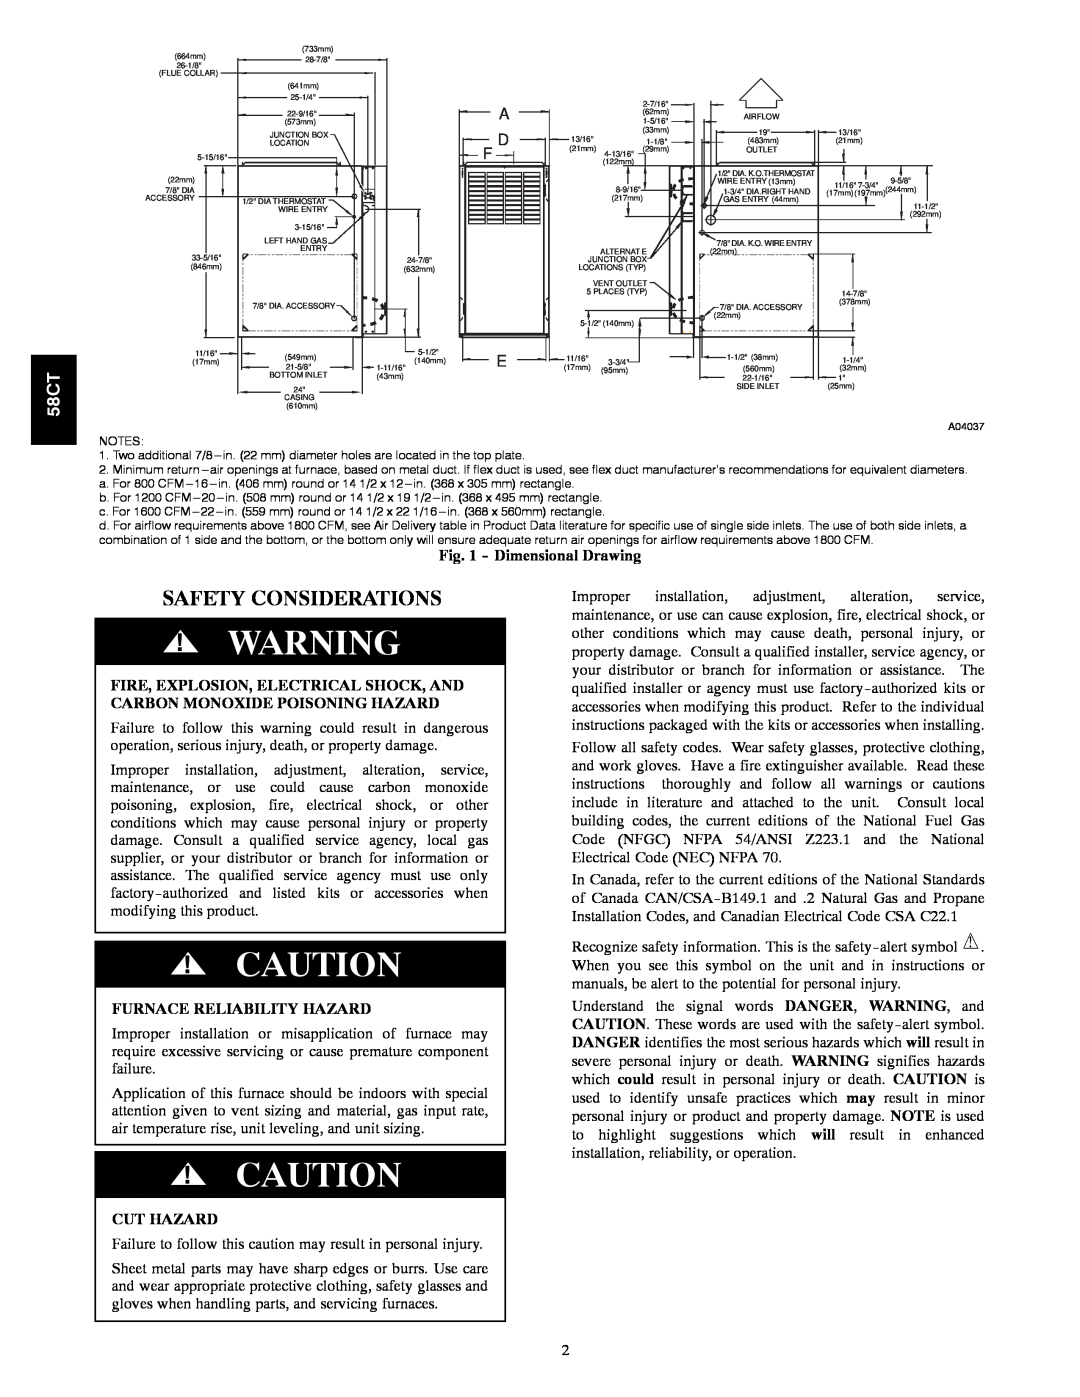 Carrier 58CTA/CTX instruction manual Safety Considerations, Dimensional Drawing, Furnace Reliability Hazard, Cut Hazard 